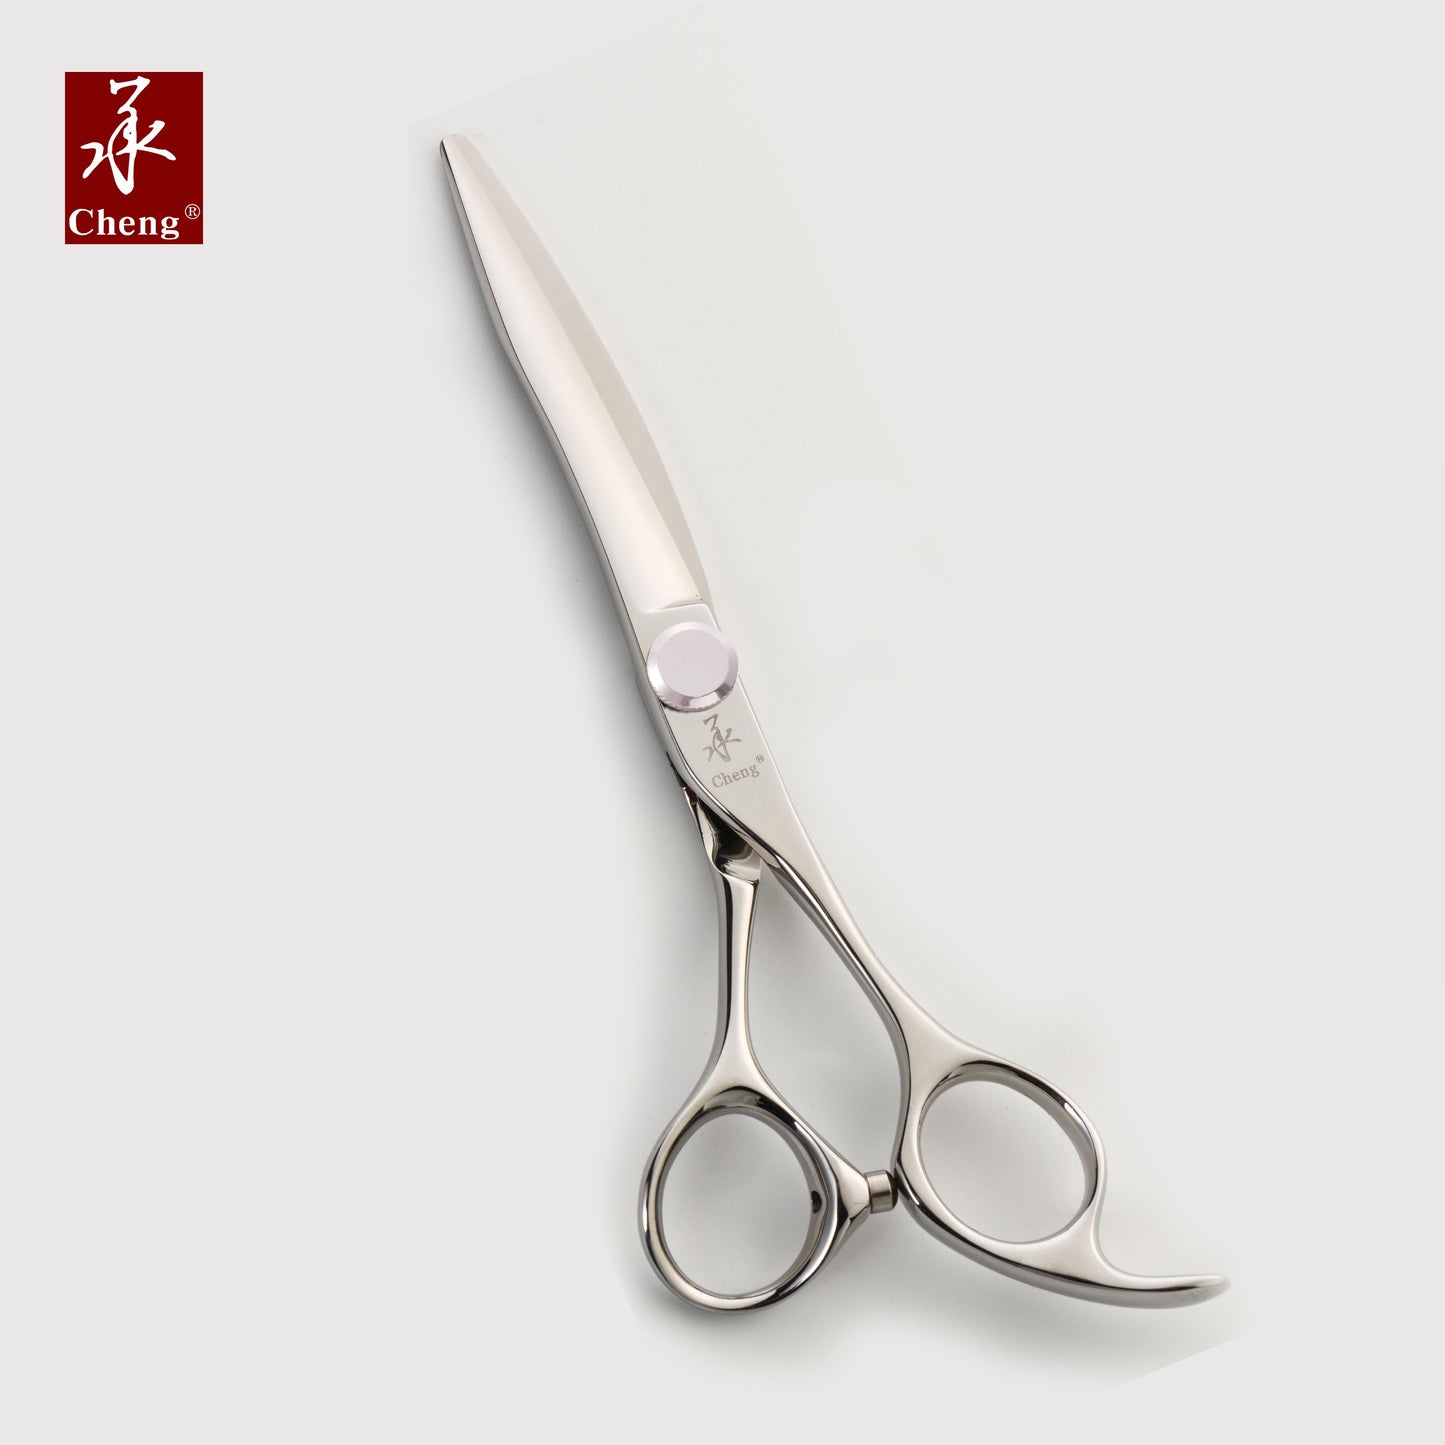 UA-614TZS Hair Thinning Scissors Cutting 6"14T Stainless Steel About=35%